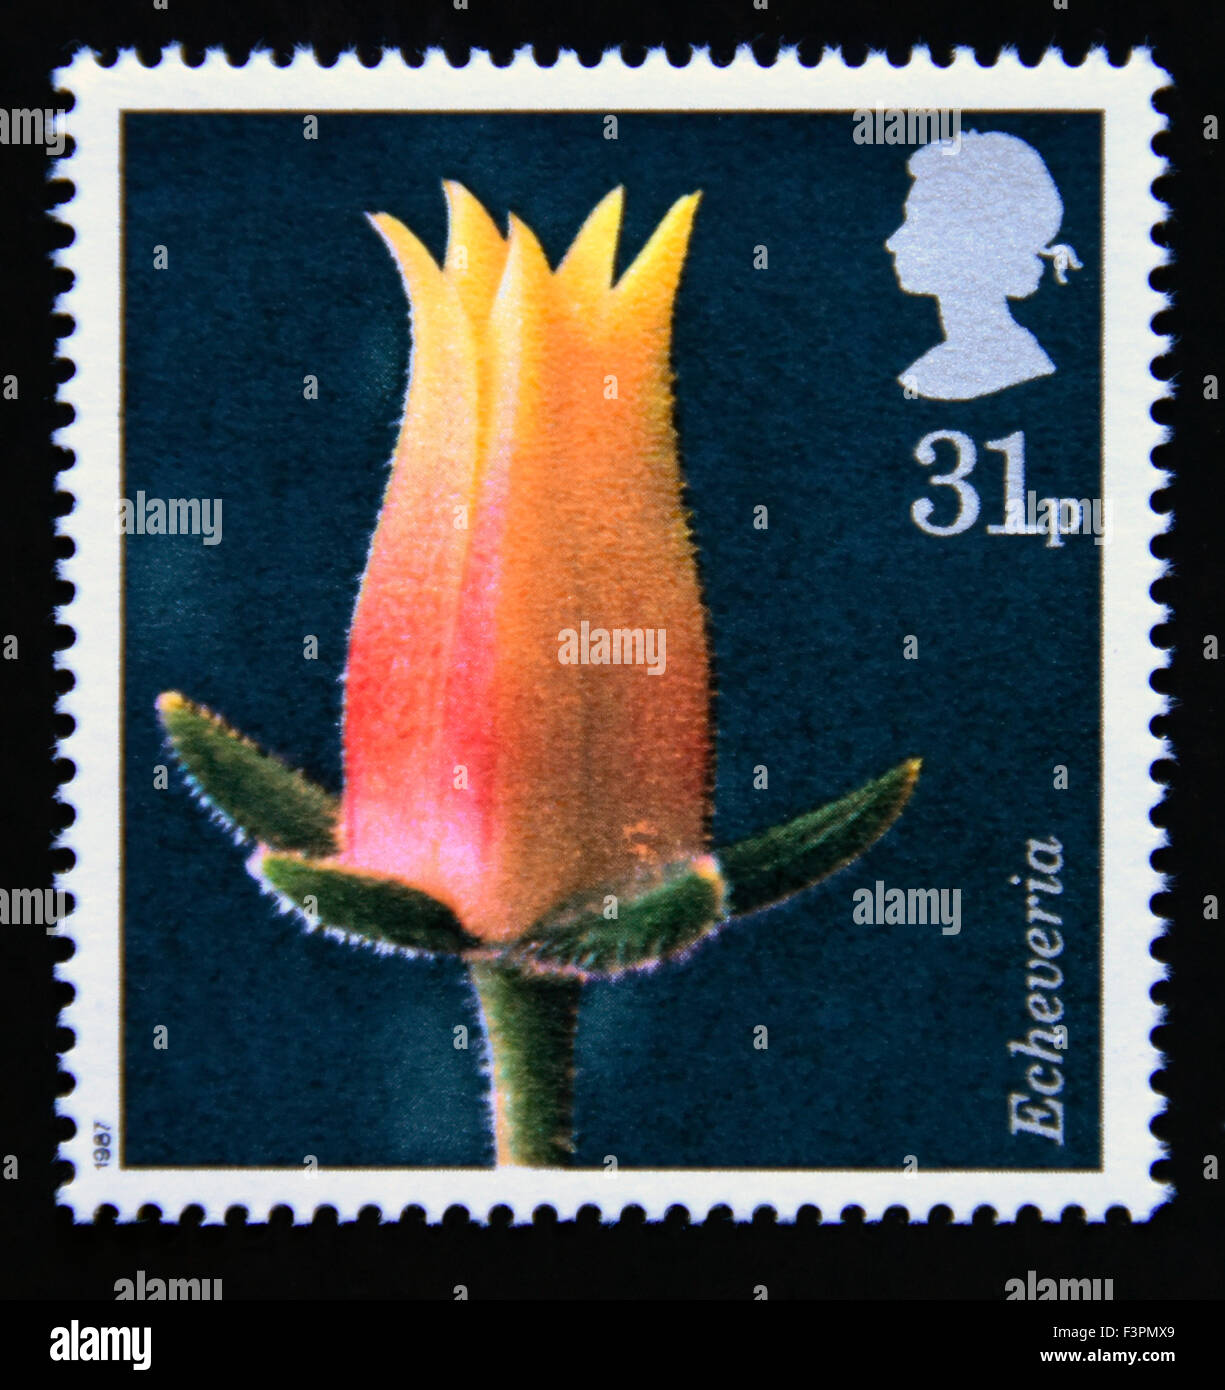 Postage stamp. Great Britain. Queen Elizabeth II. 1987. Flower Photographs by Alfred Lammer. 31p. Stock Photo